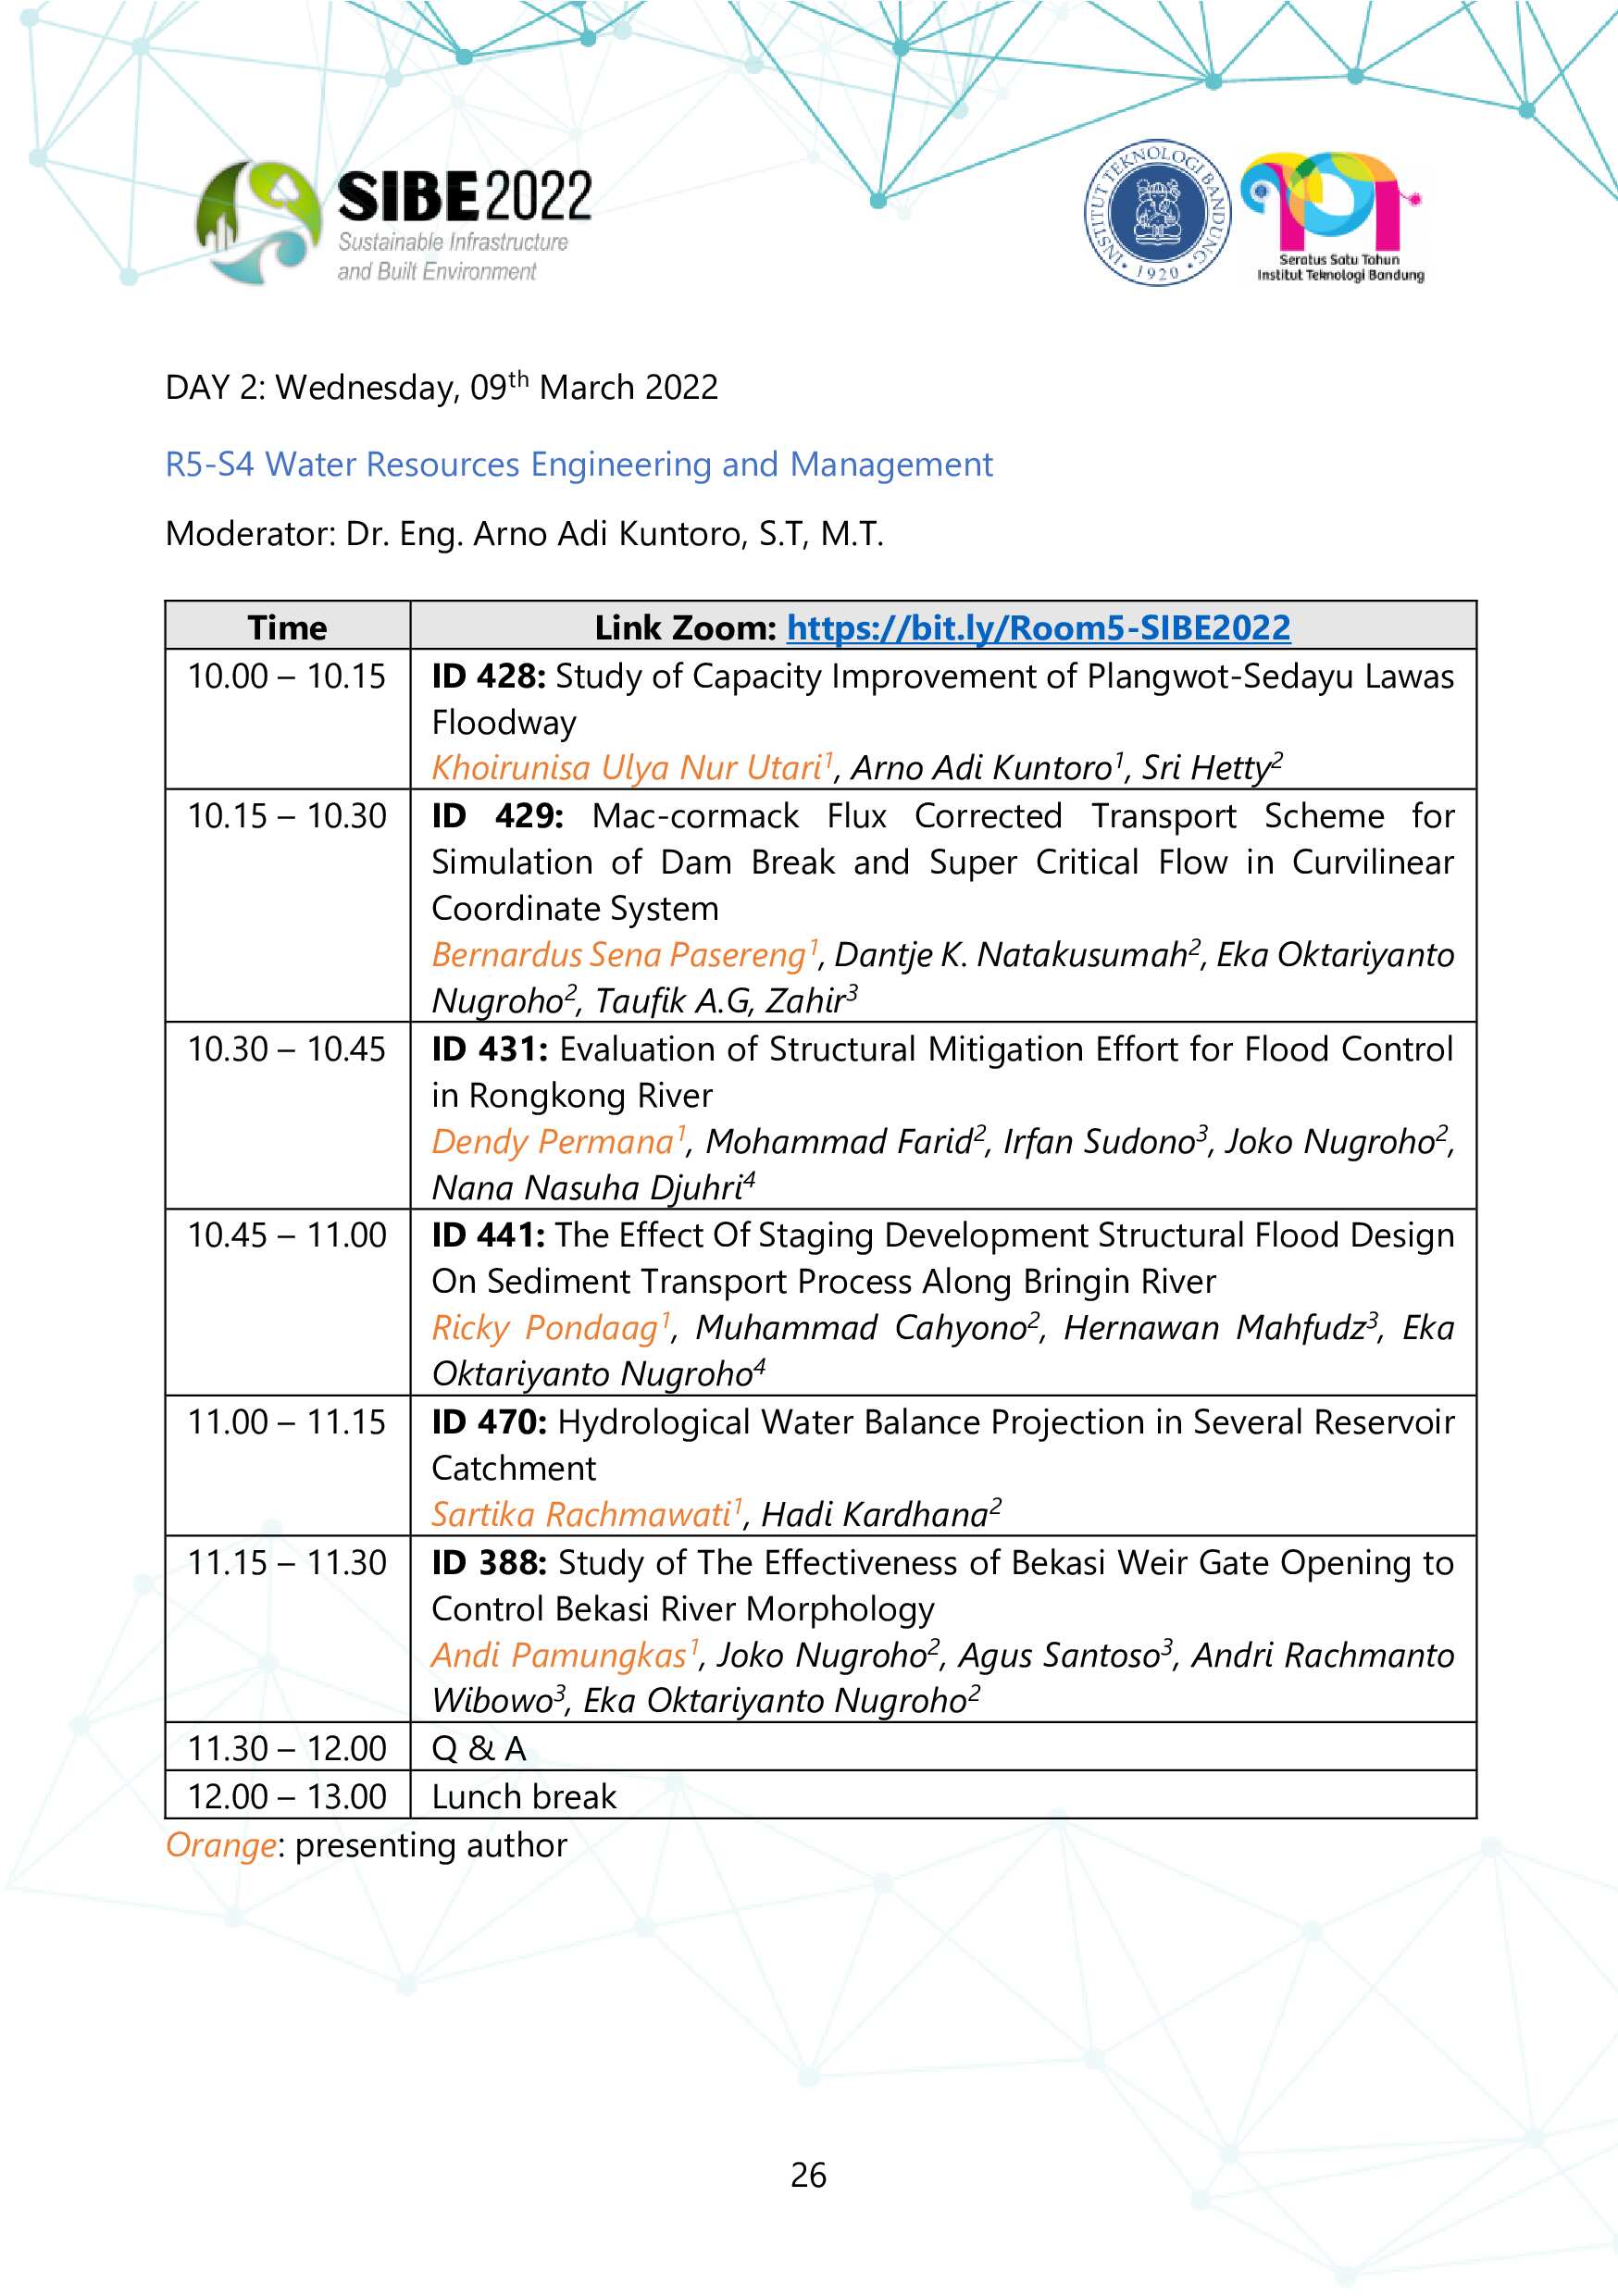 SIBE 2022 Program Schedule 8-9 March 2022-25